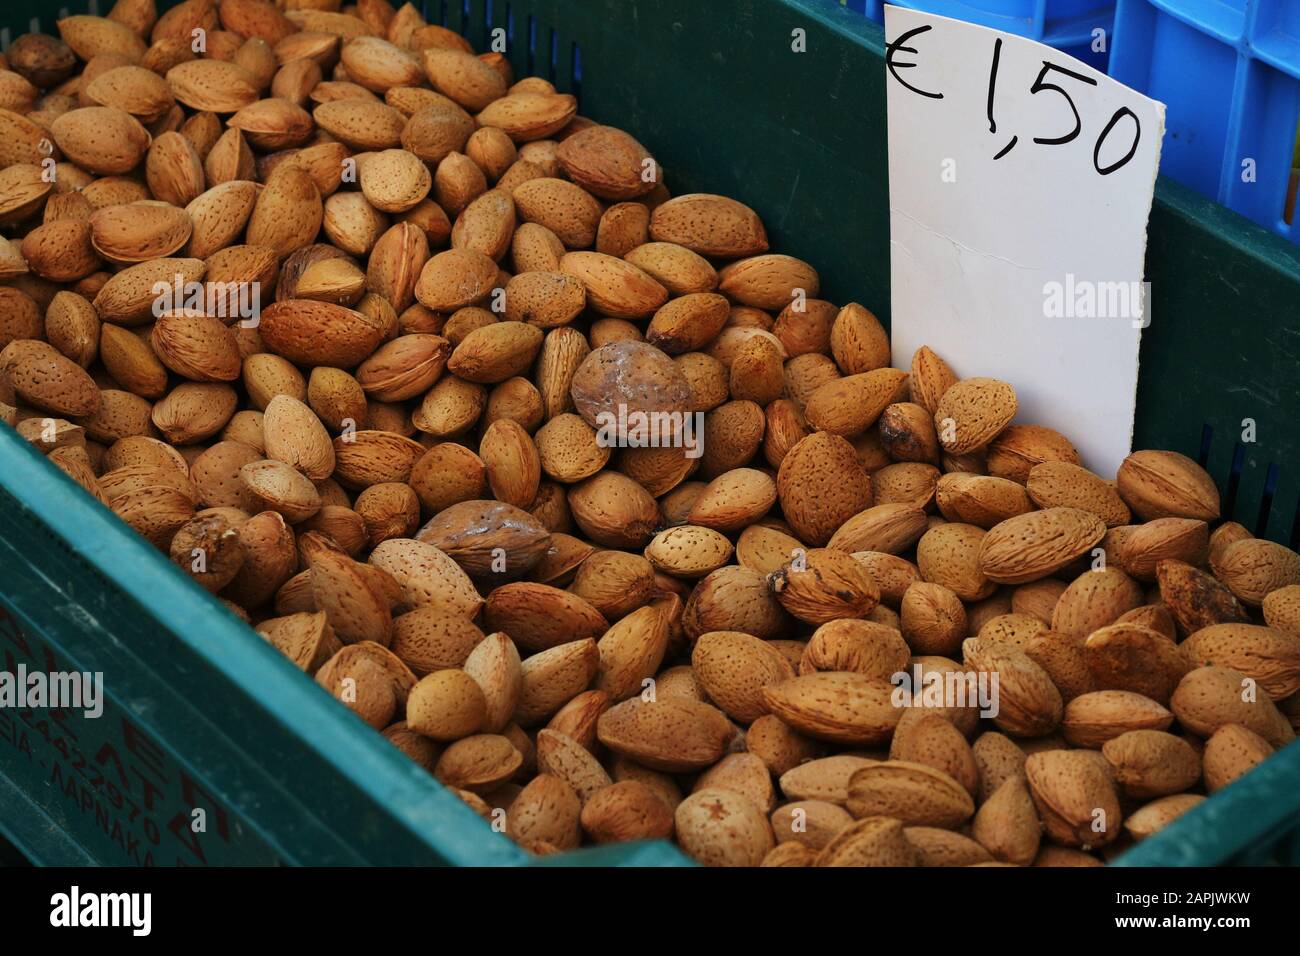 Almonds in shells for sale with price in euro Stock Photo